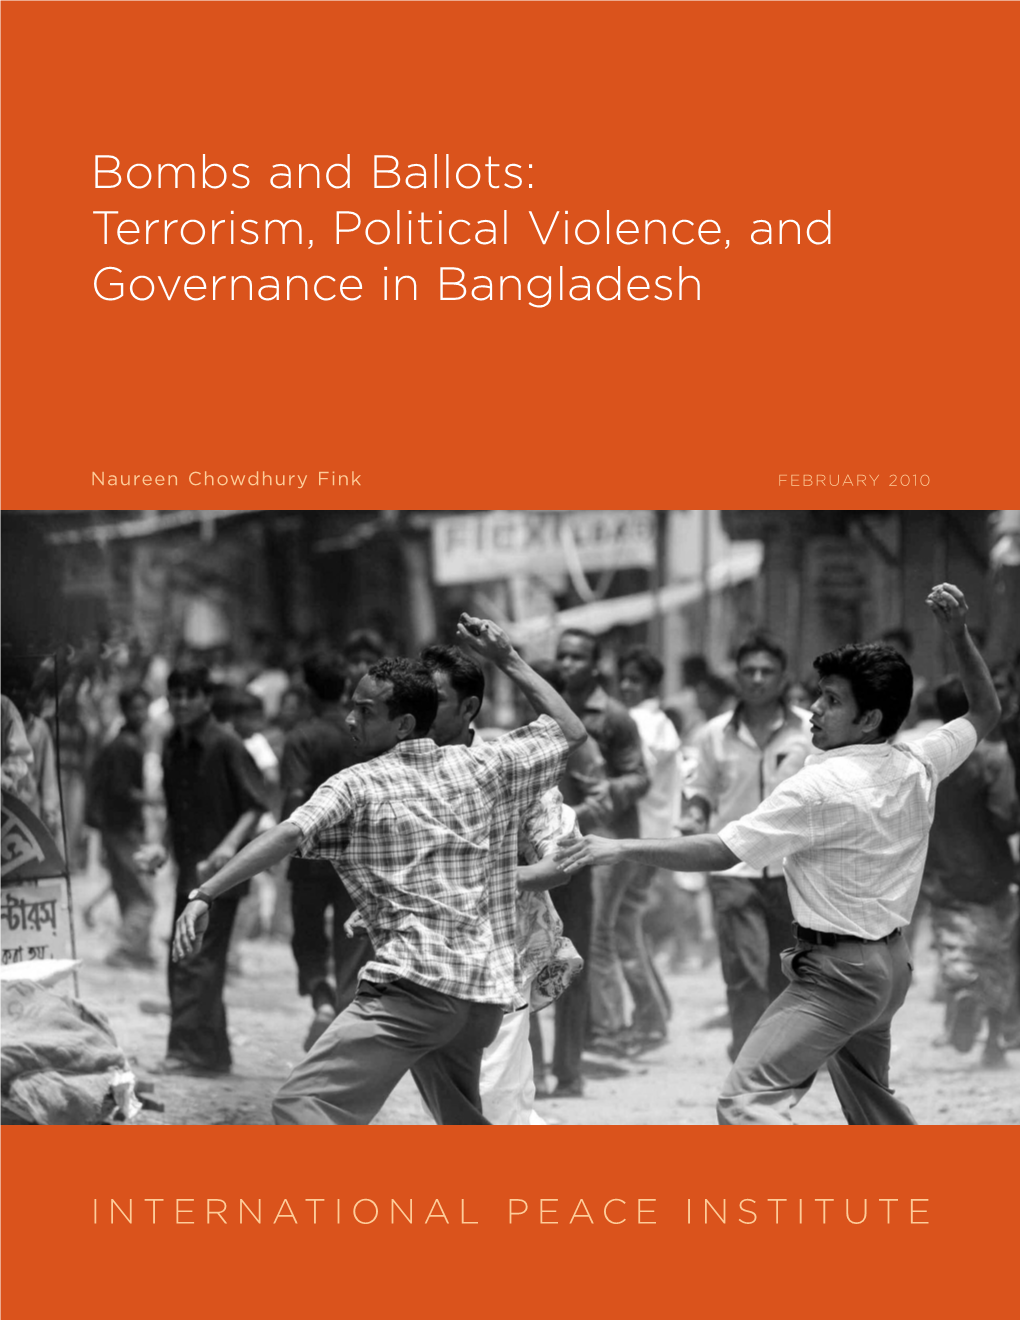 Bombs and Ballots: Terrorism, Political Violence, and Governance in Bangladesh